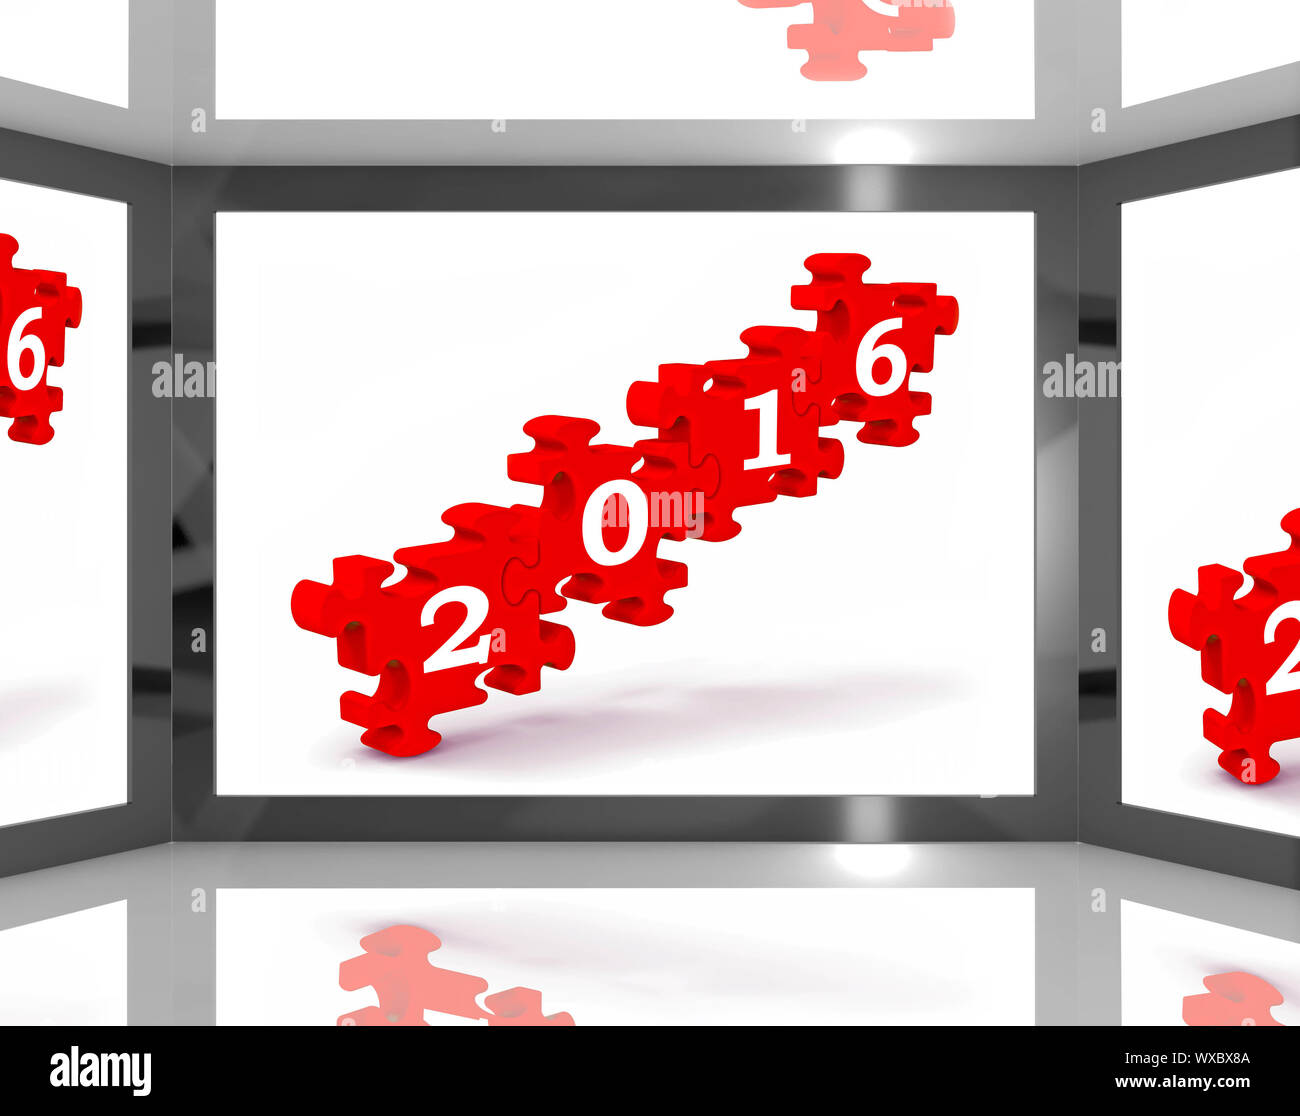 2016 On Screen Shows Predictions And Future Technology Stock Photo